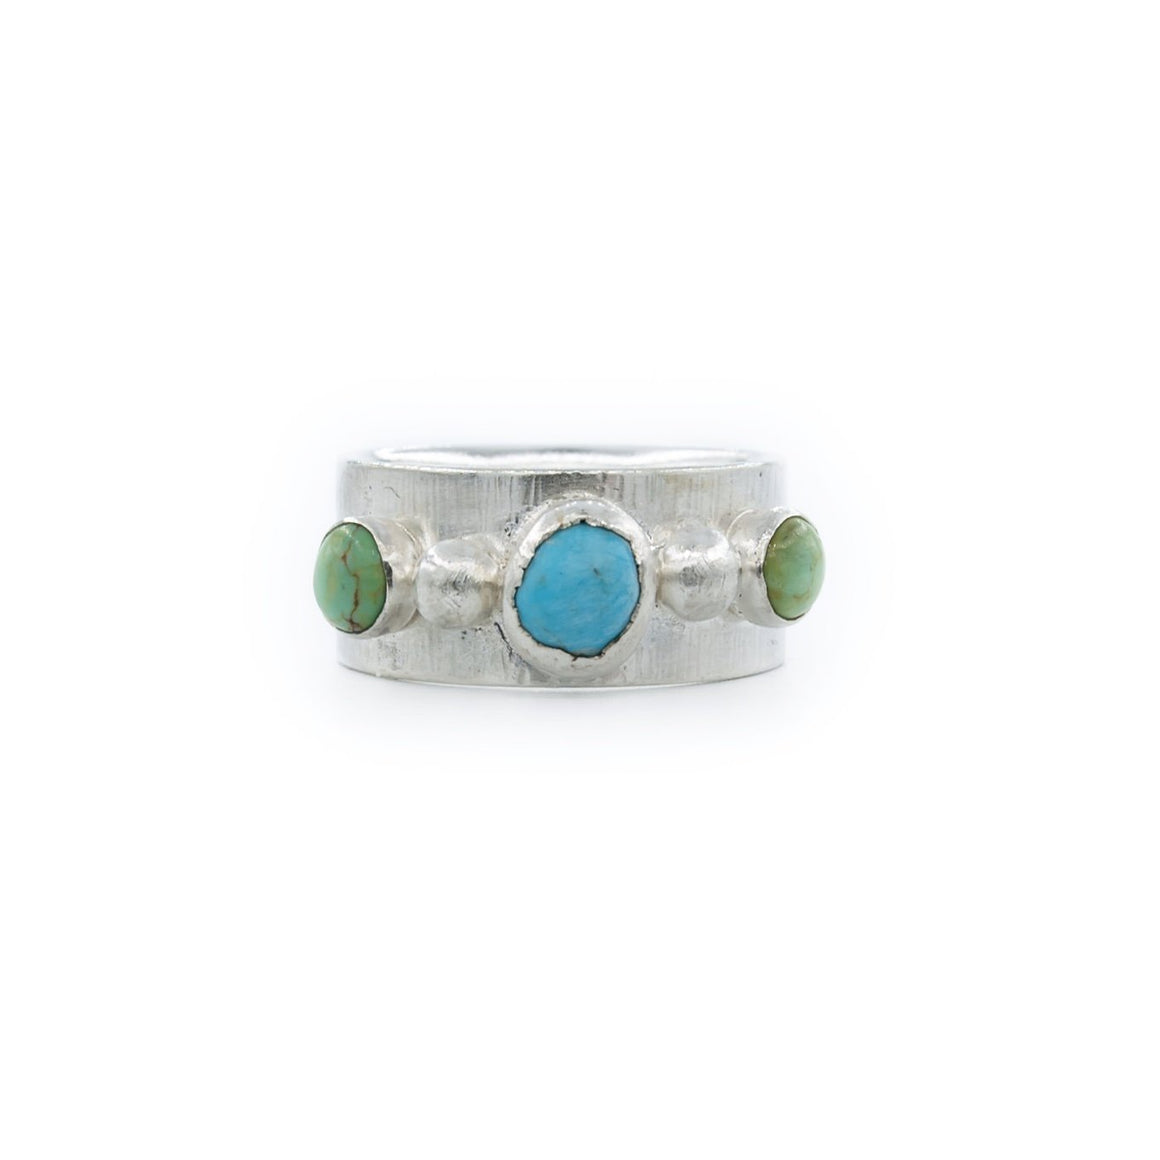 Blue and Green Turquoise Wedding Band Style Ring by OSJ